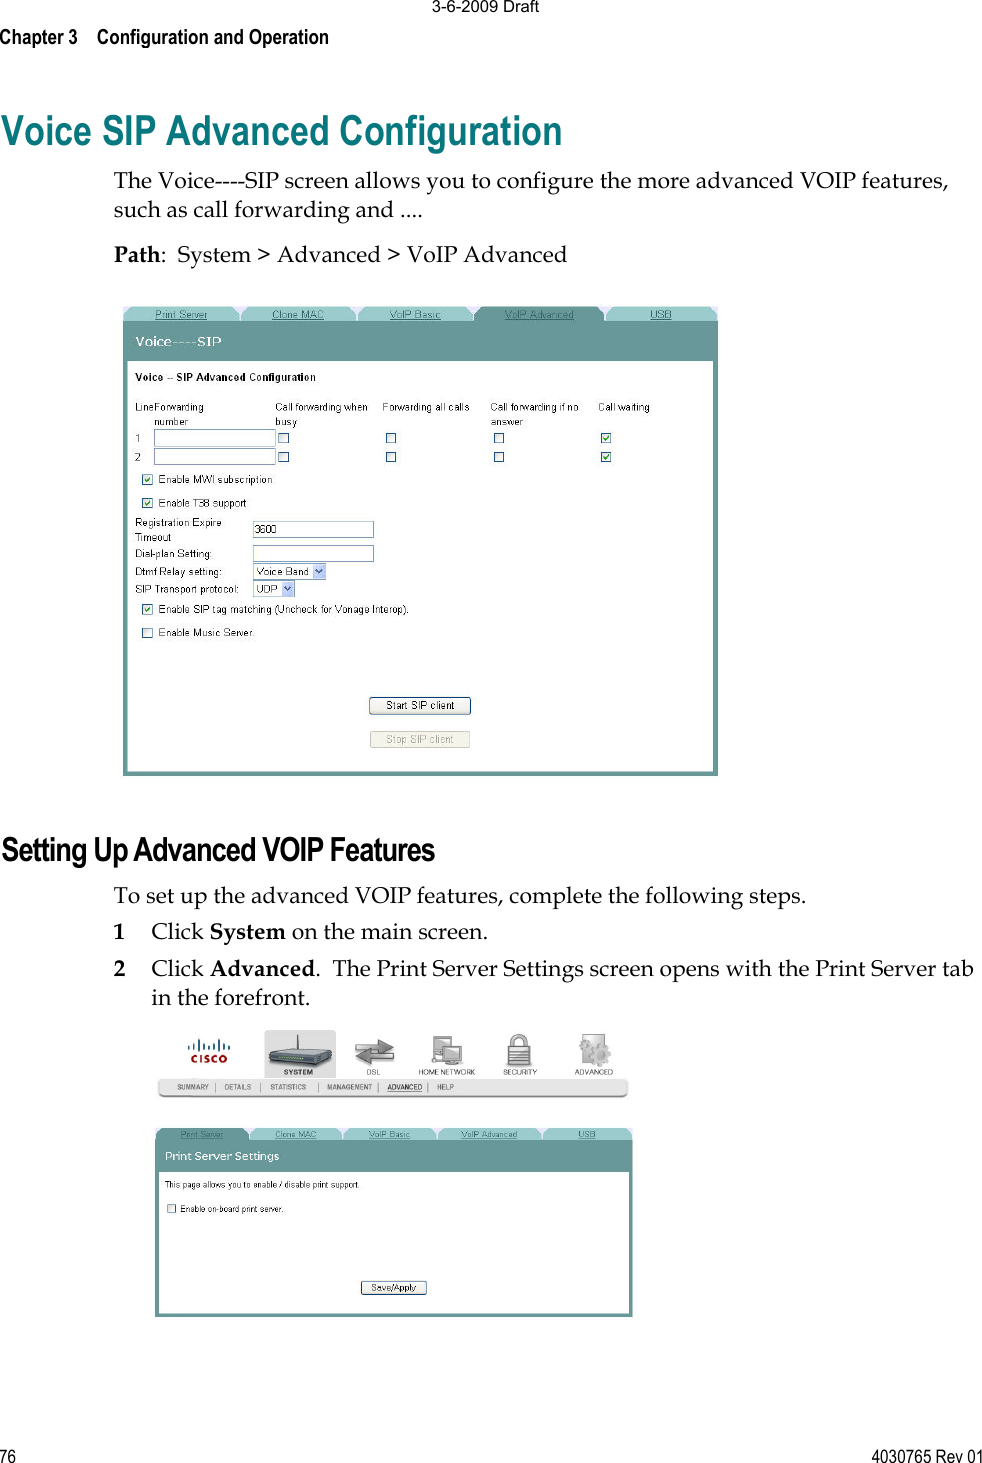 Chapter 3    Configuration and Operation 76 4030765 Rev 01Voice SIP Advanced Configuration The Voice----SIP screen allows you to configure the more advanced VOIP features, such as call forwarding and ....Path:  System &gt; Advanced &gt; VoIP Advanced Setting Up Advanced VOIP Features To set up the advanced VOIP features, complete the following steps. 1Click System on the main screen.  2Click Advanced.  The Print Server Settings screen opens with the Print Server tab in the forefront. 3-6-2009 Draft